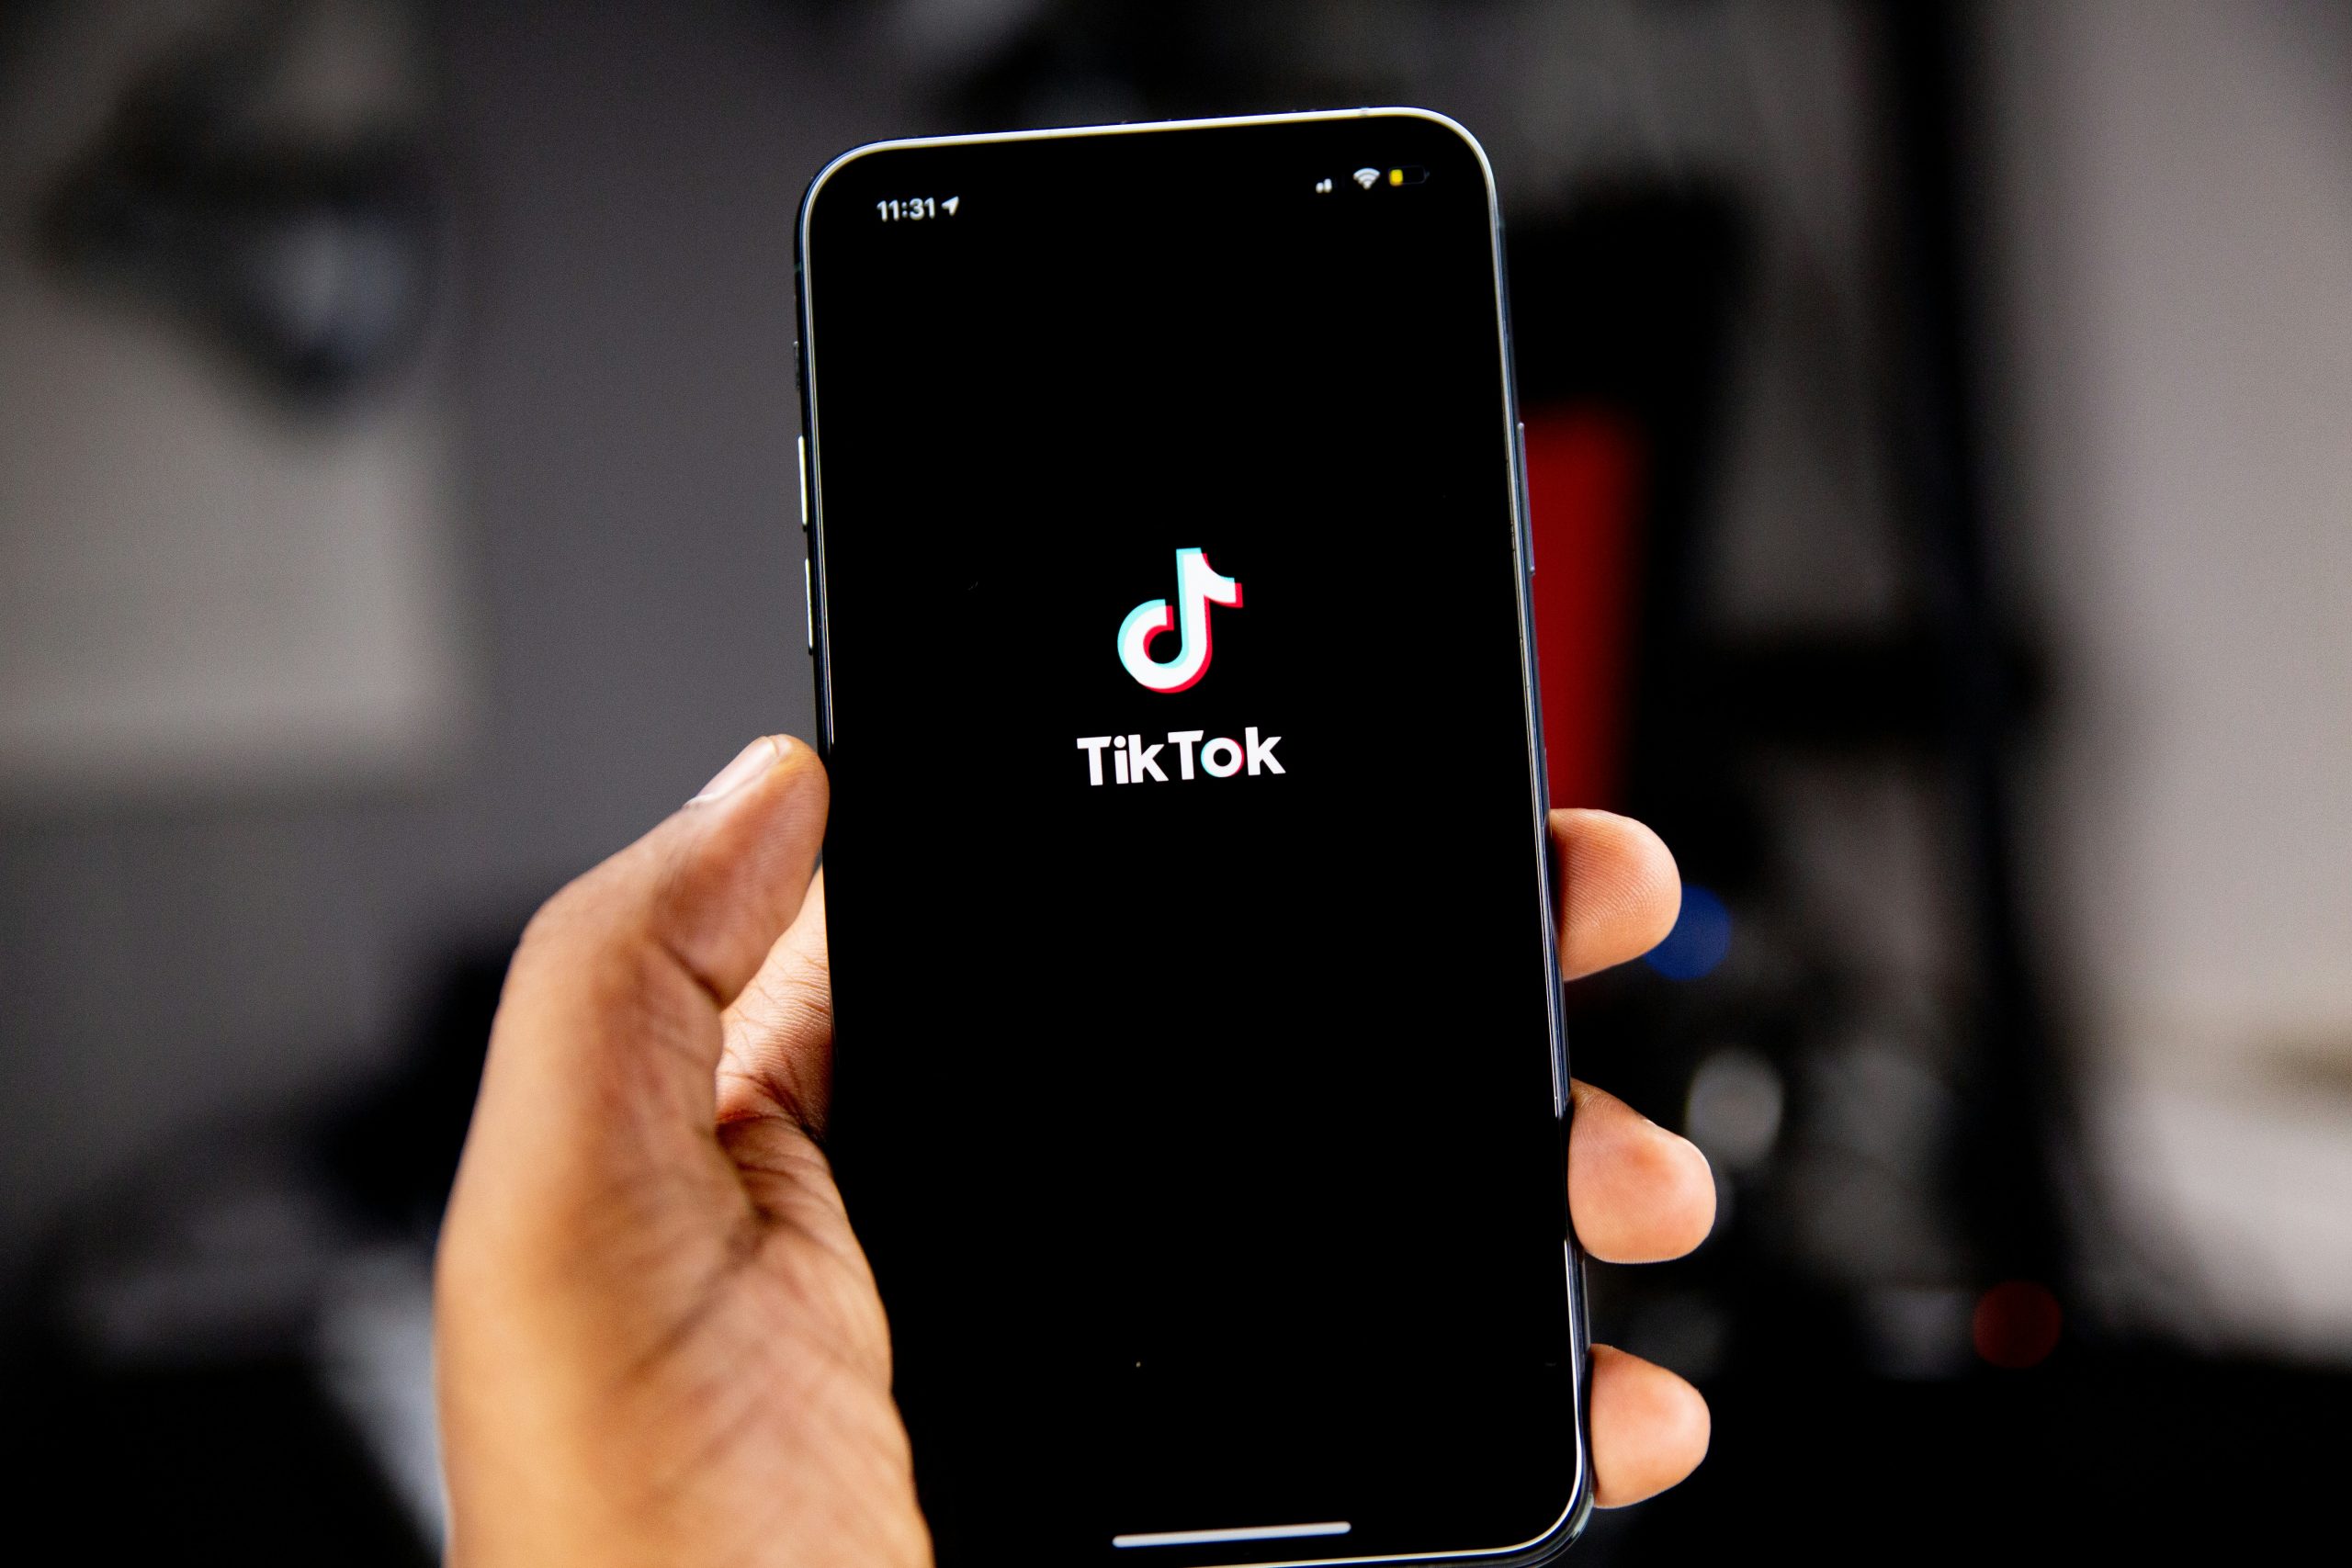 Why TikTok May Be Blocked in the USA